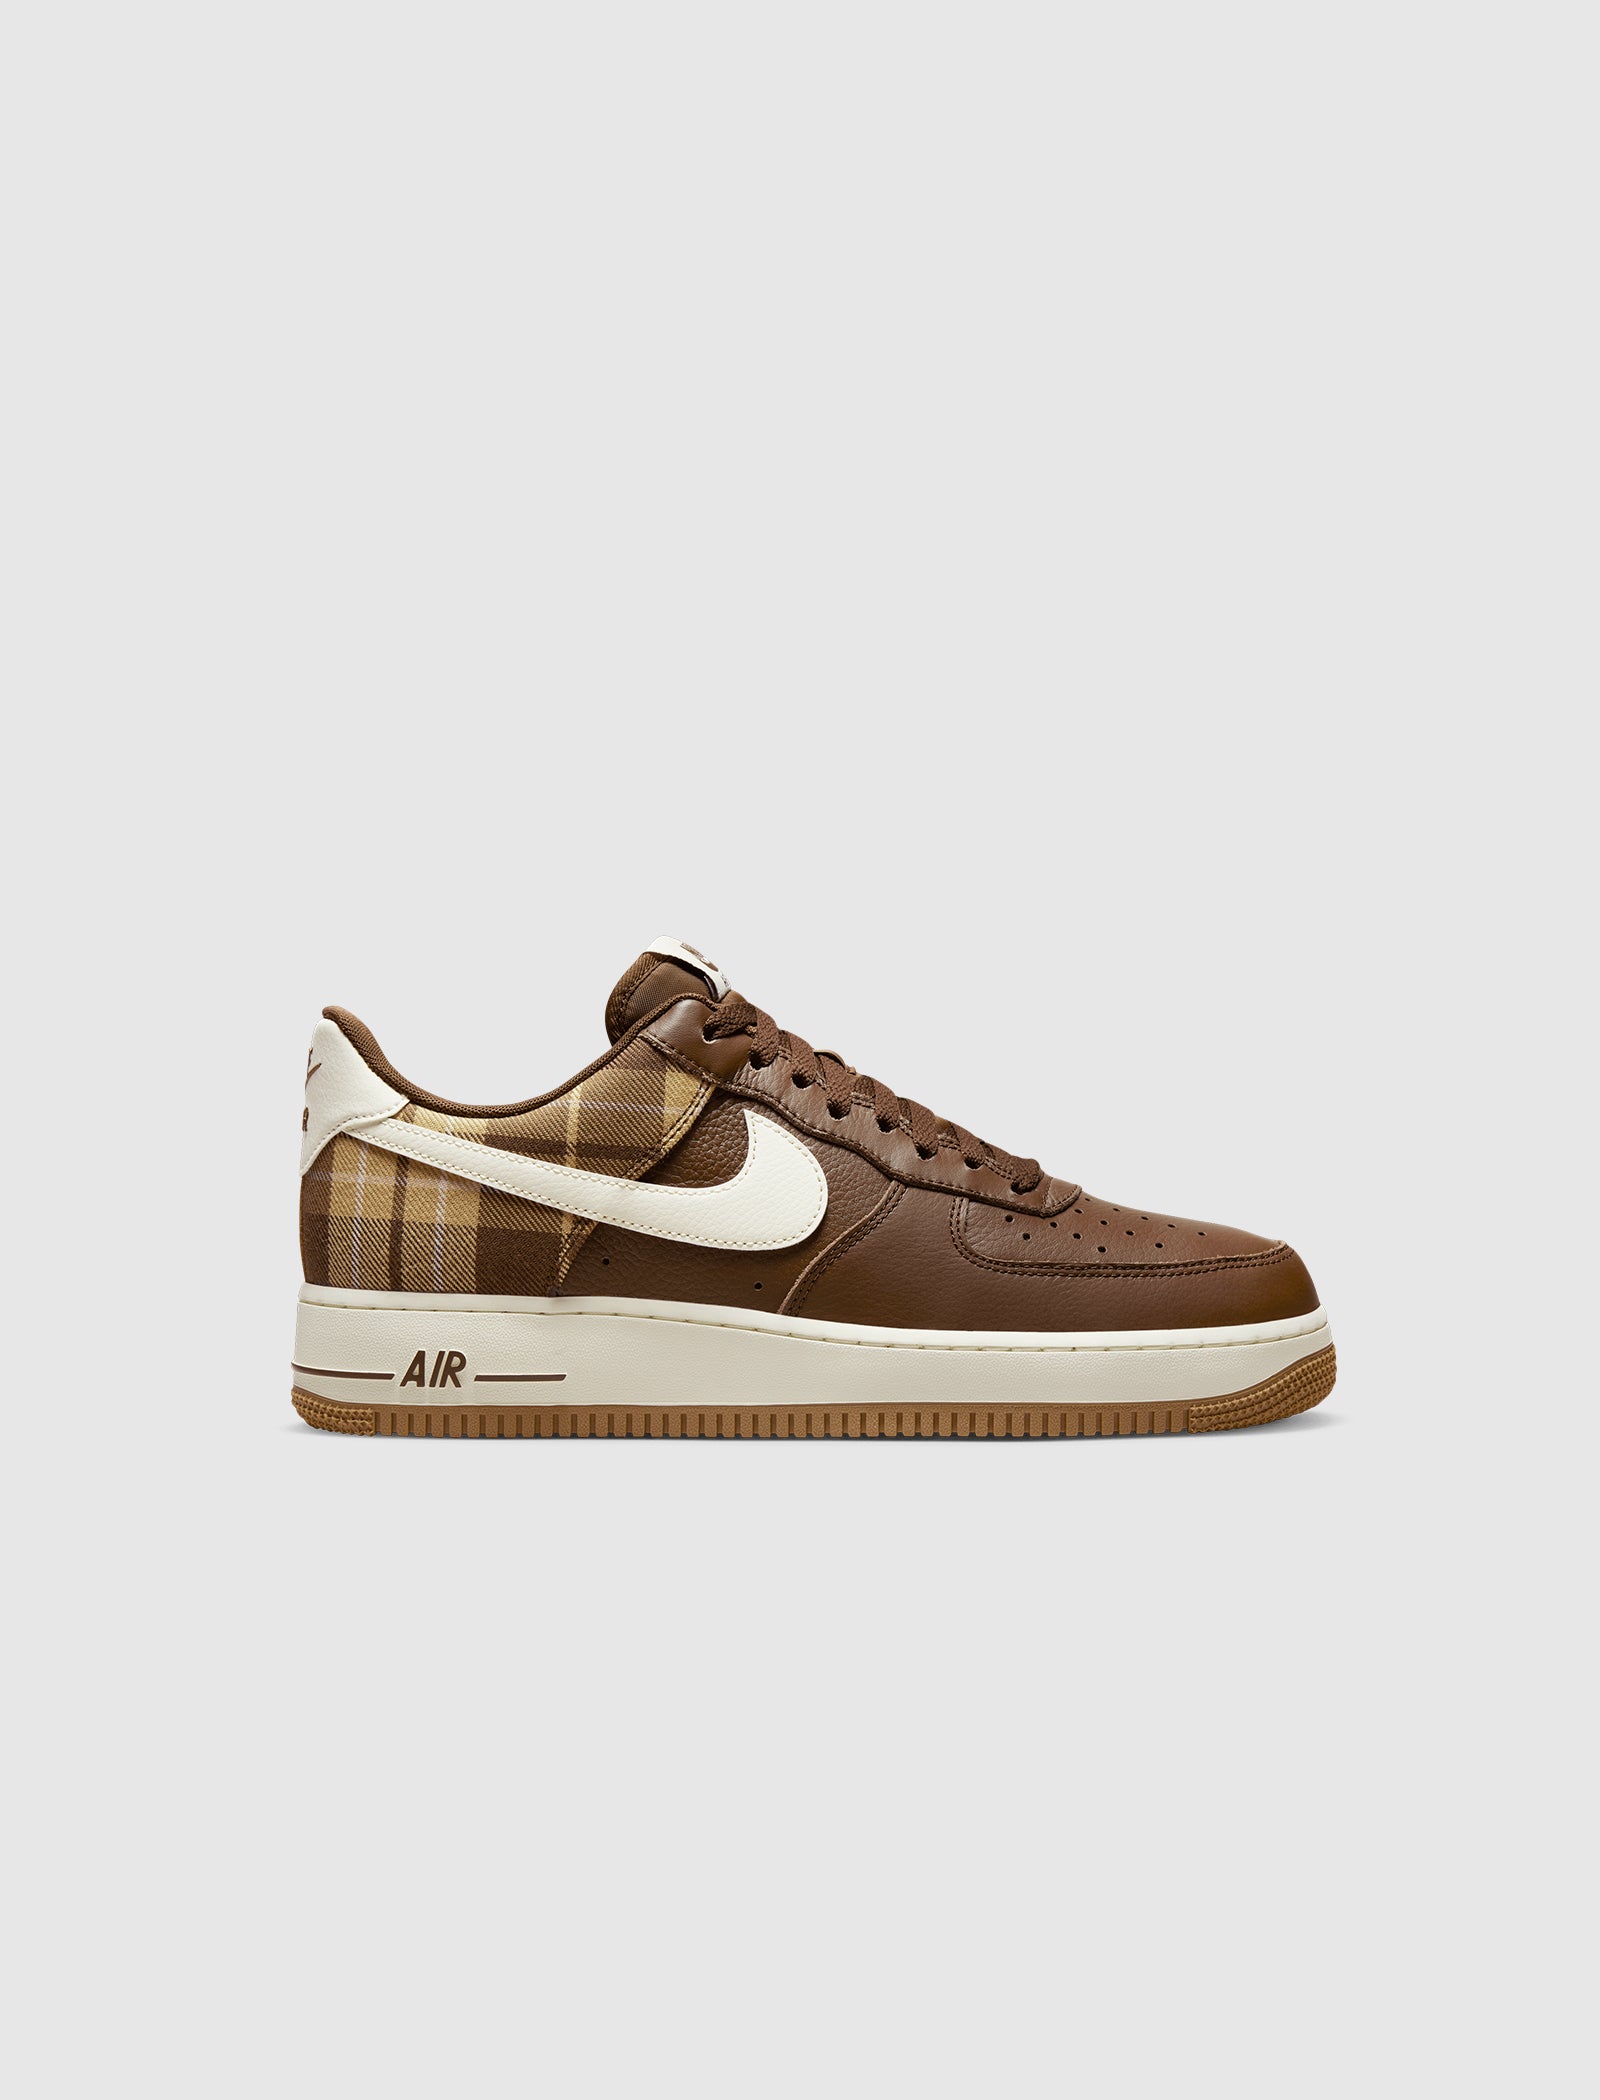 AIR FORCE 1 '07 LX LOW "PLAID CACAO"